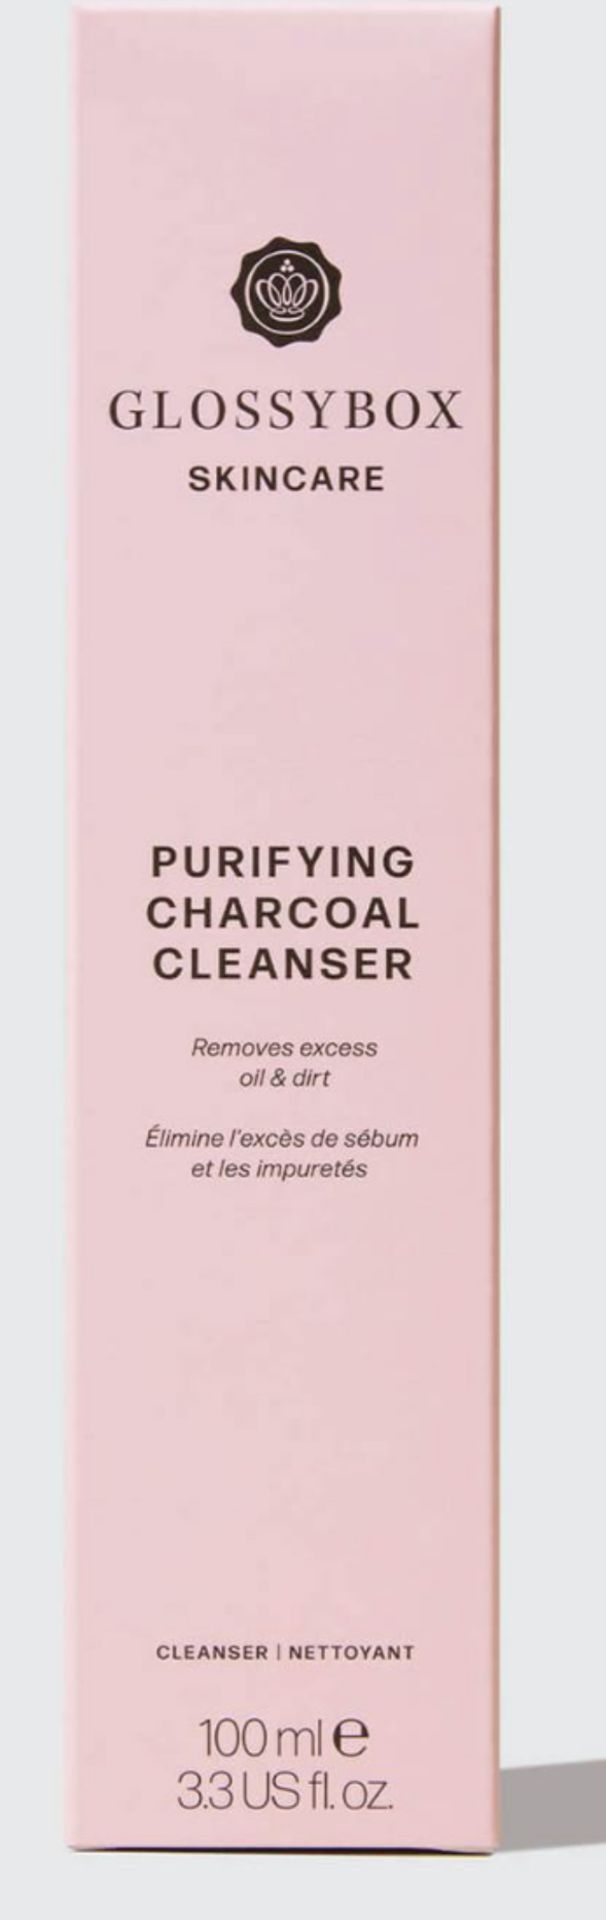 480 X GLOSSYBOX PURIFYING CHARCOAL CLEANSER RRP £6240 - Image 2 of 4